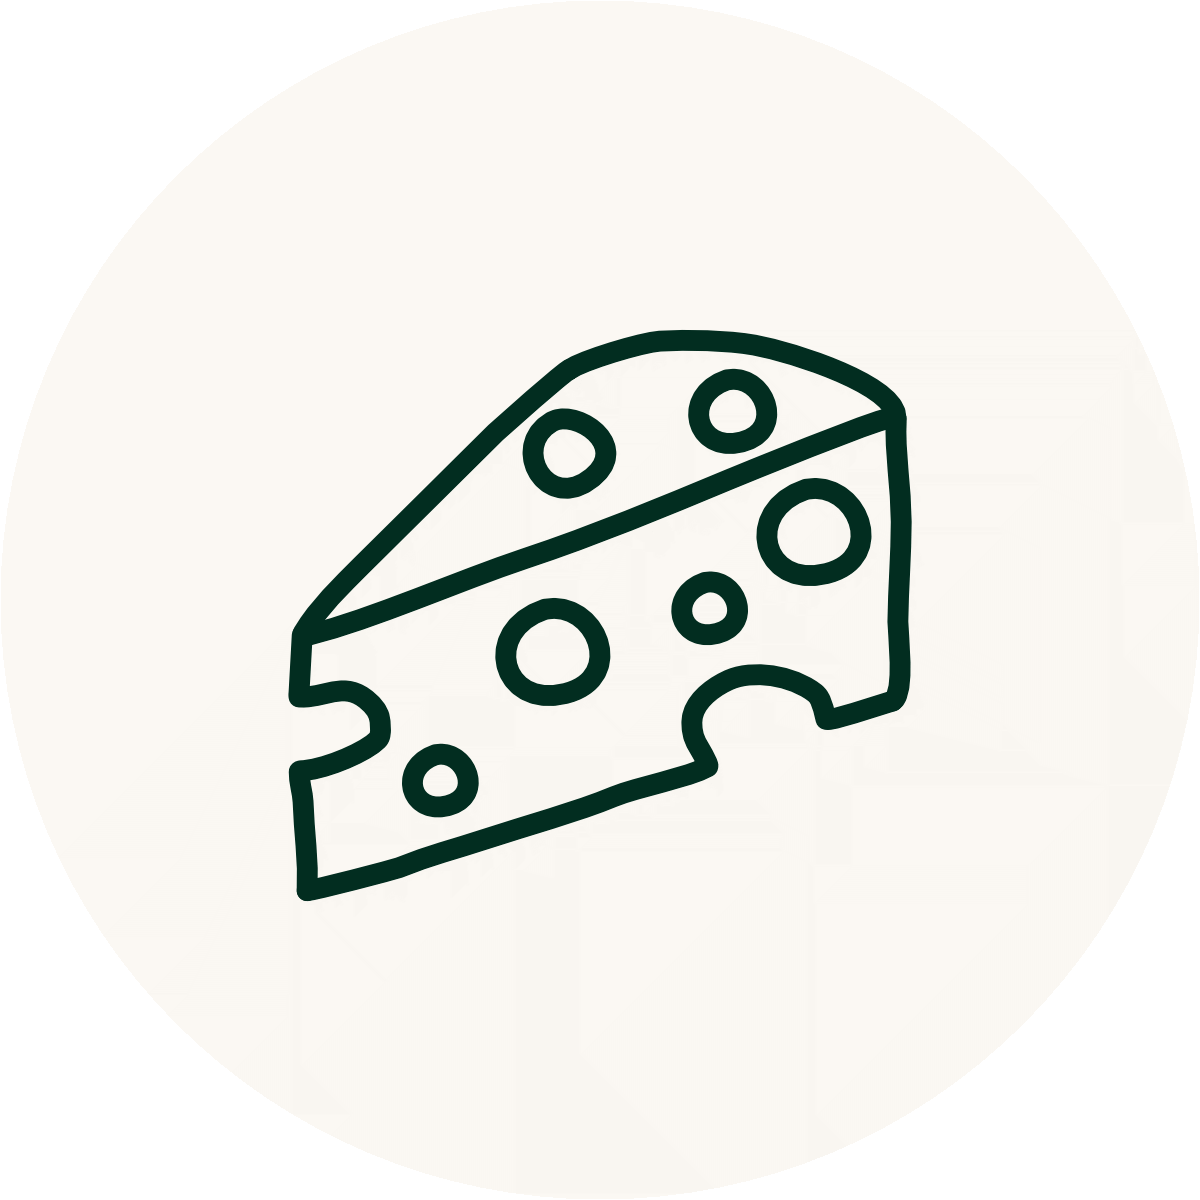 Clipart of a slice of cheese.